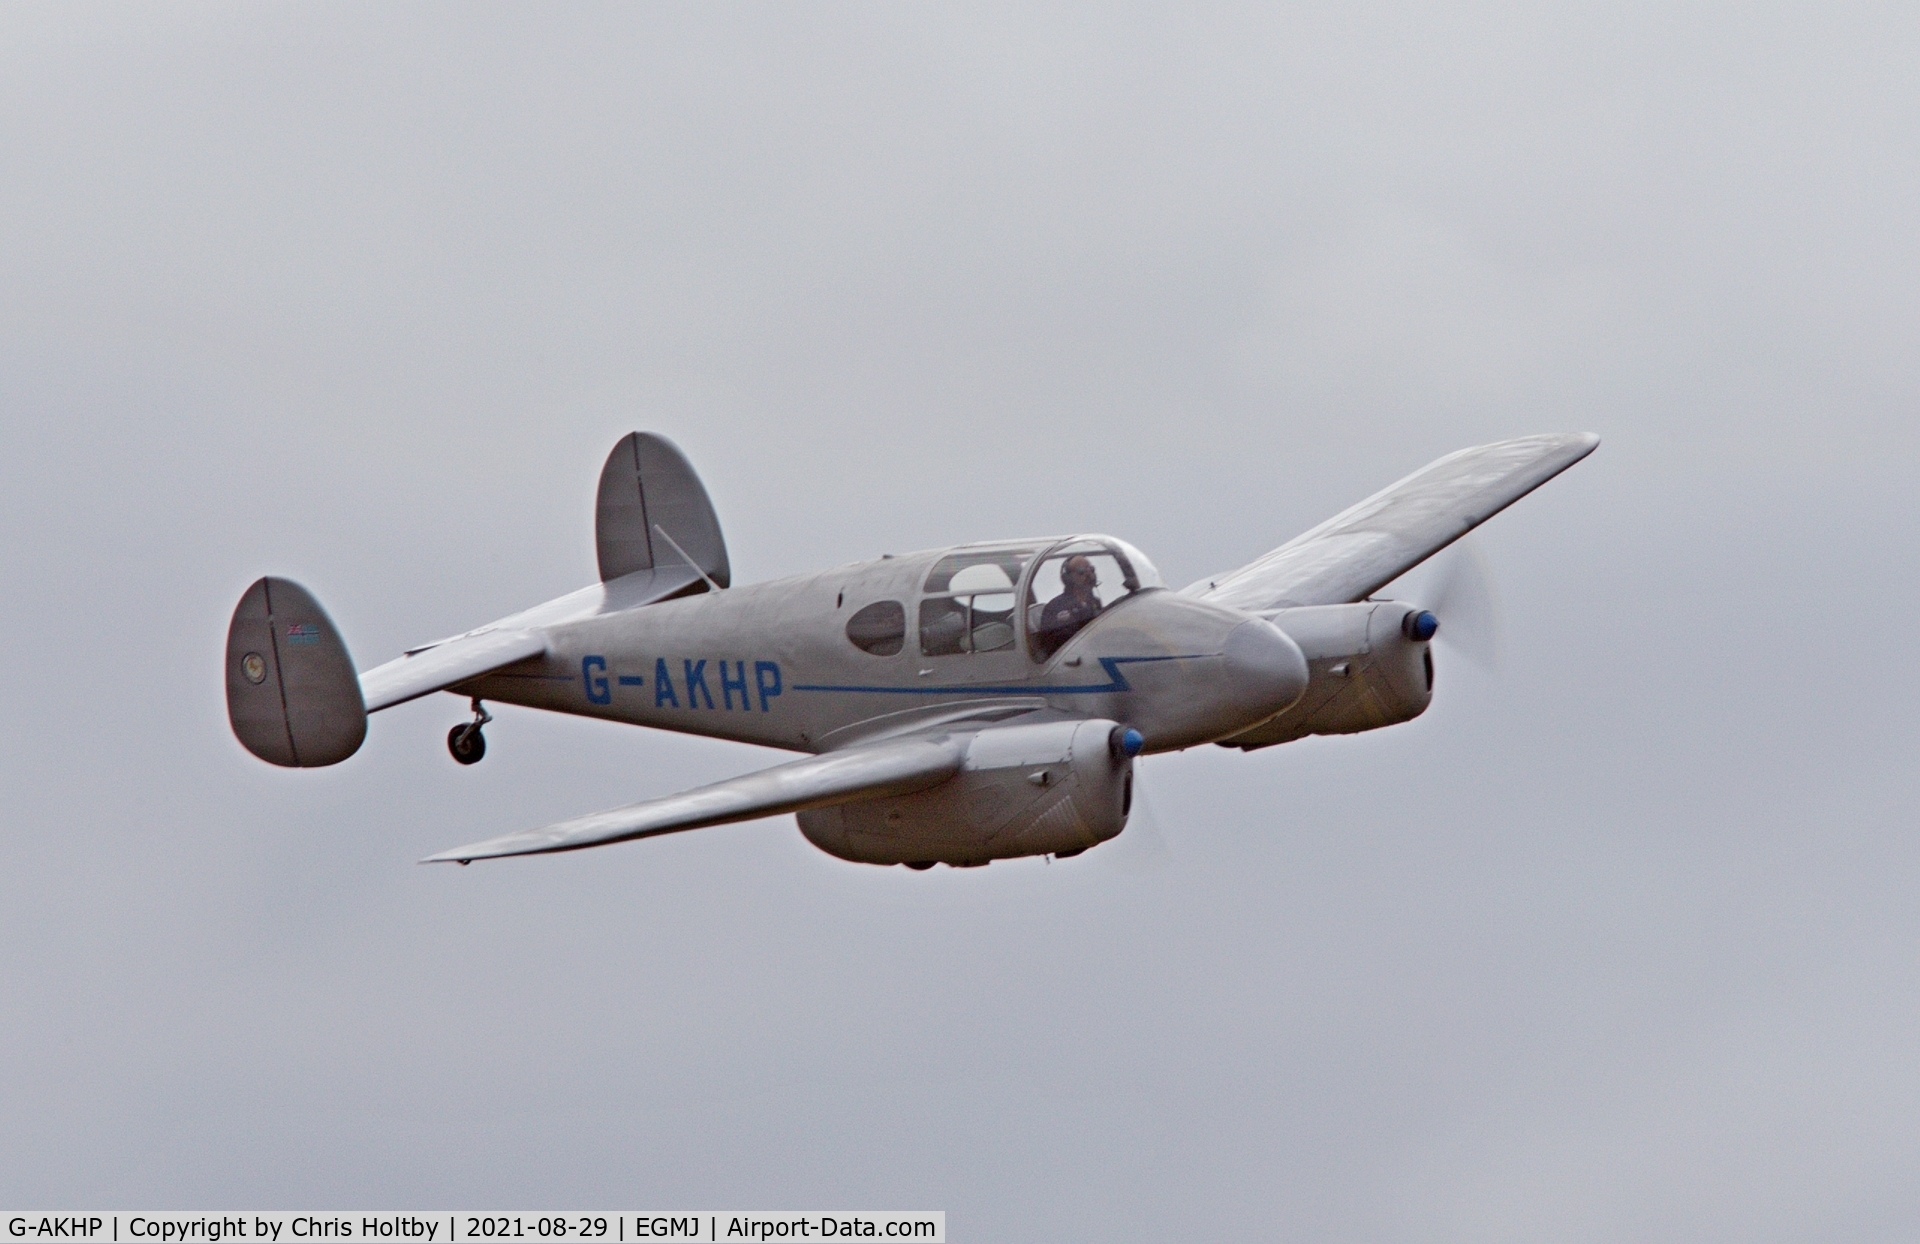 G-AKHP, 1947 Miles M65 Gemini 1A C/N 6519, Displaying at the Little Gransden Airshow 2021